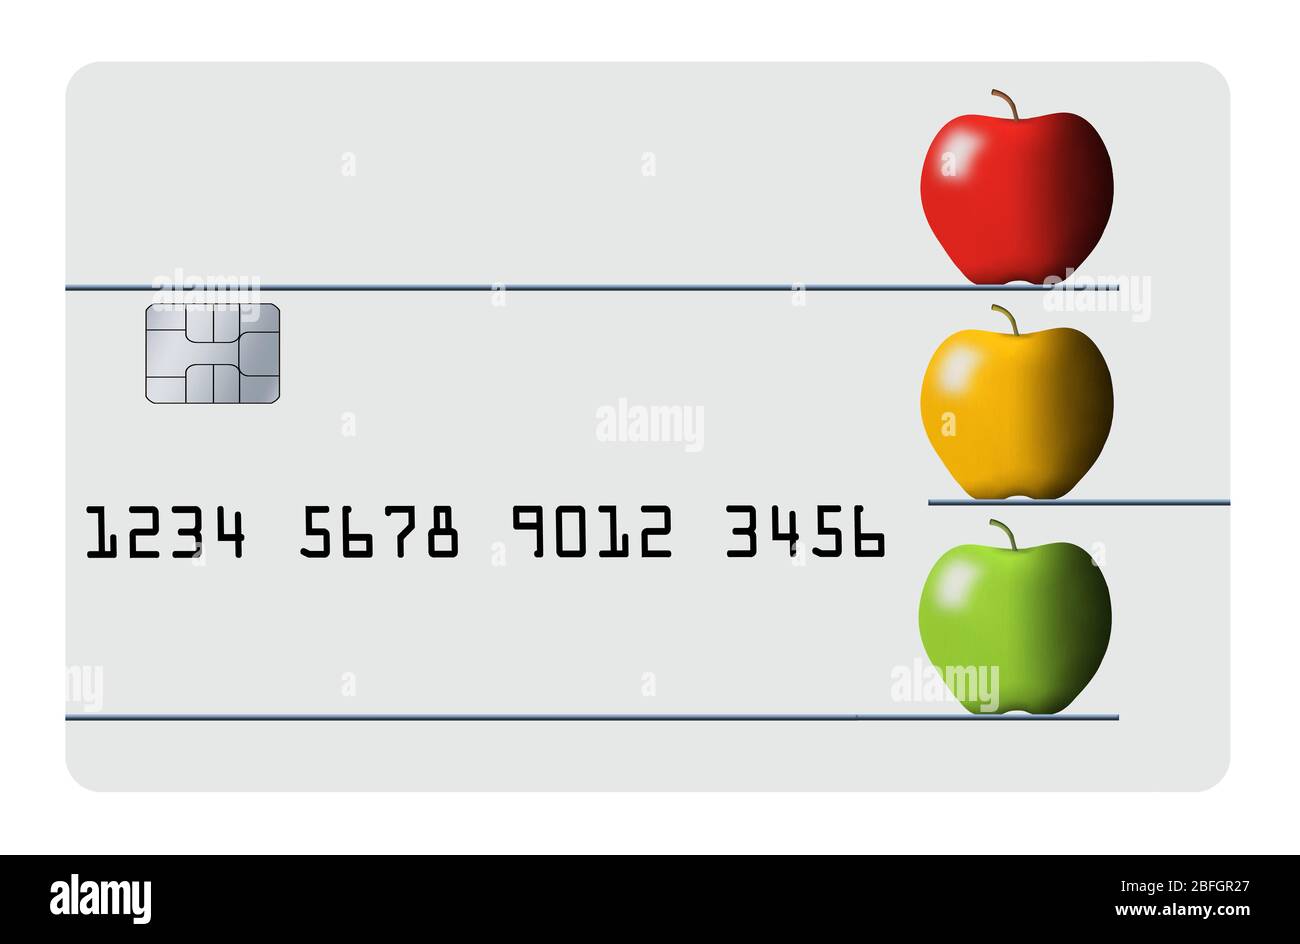 Images of apples decorate a contemporary credit or debit card. Stock Photo